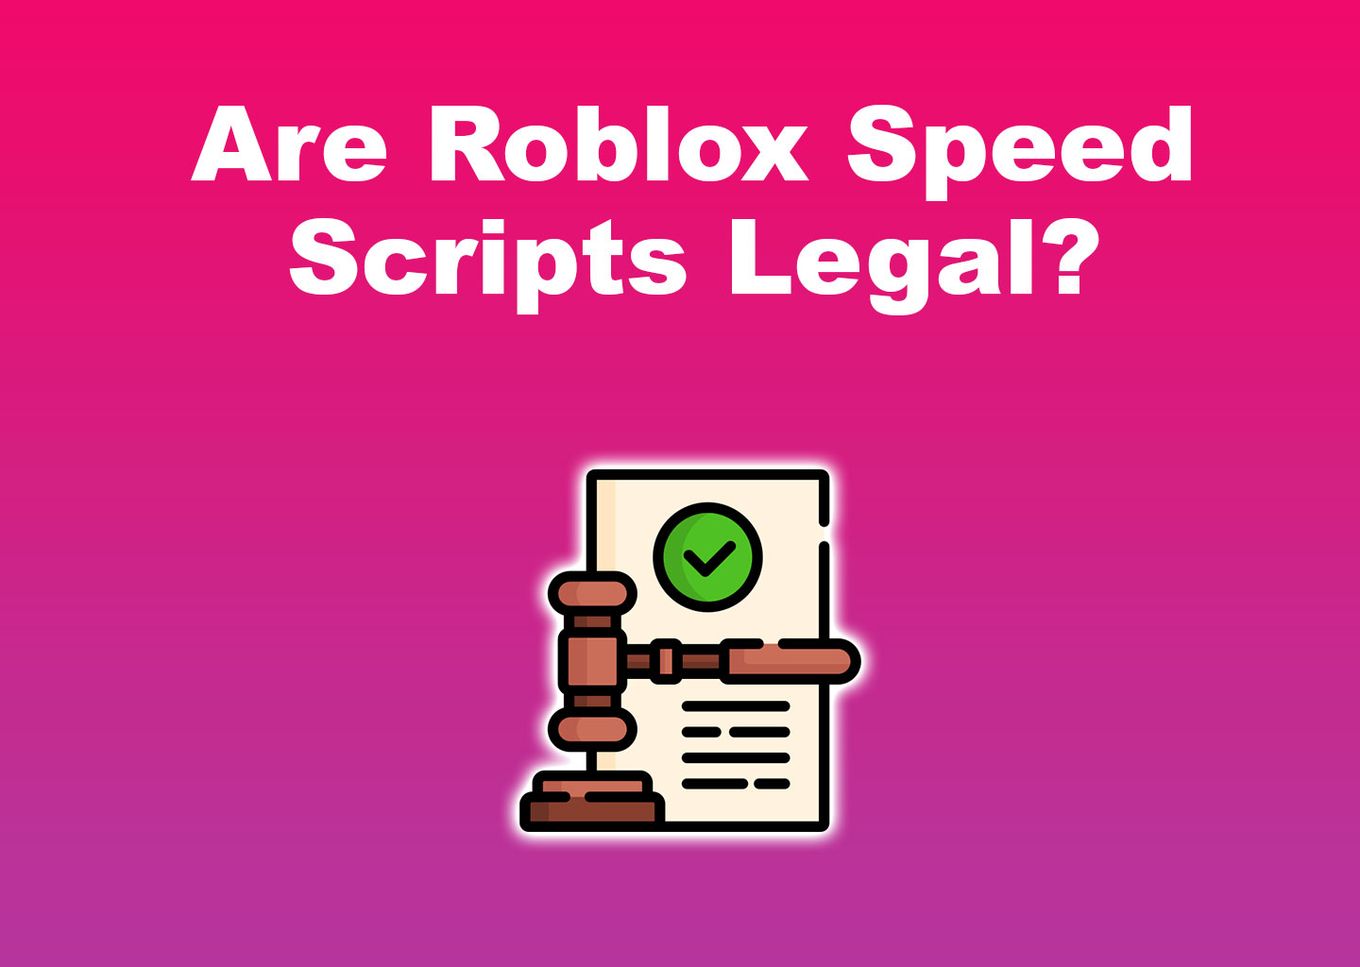 Are Roblox speed scripts legal?